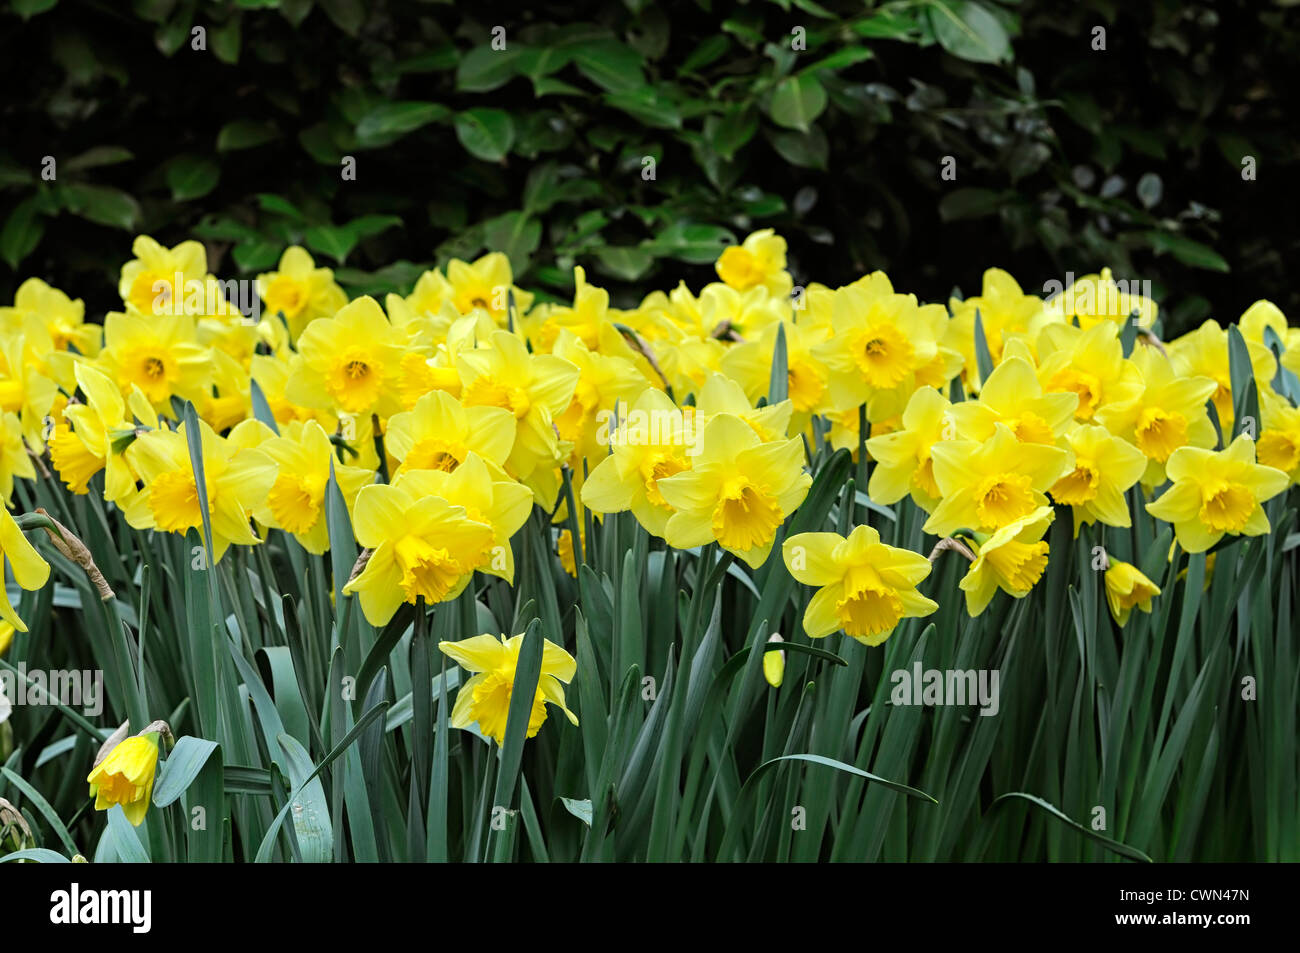 Narcissus agathon daffodil large cup cupped flowers drift bed spring bulb flowering bloom blossom yellow Stock Photo